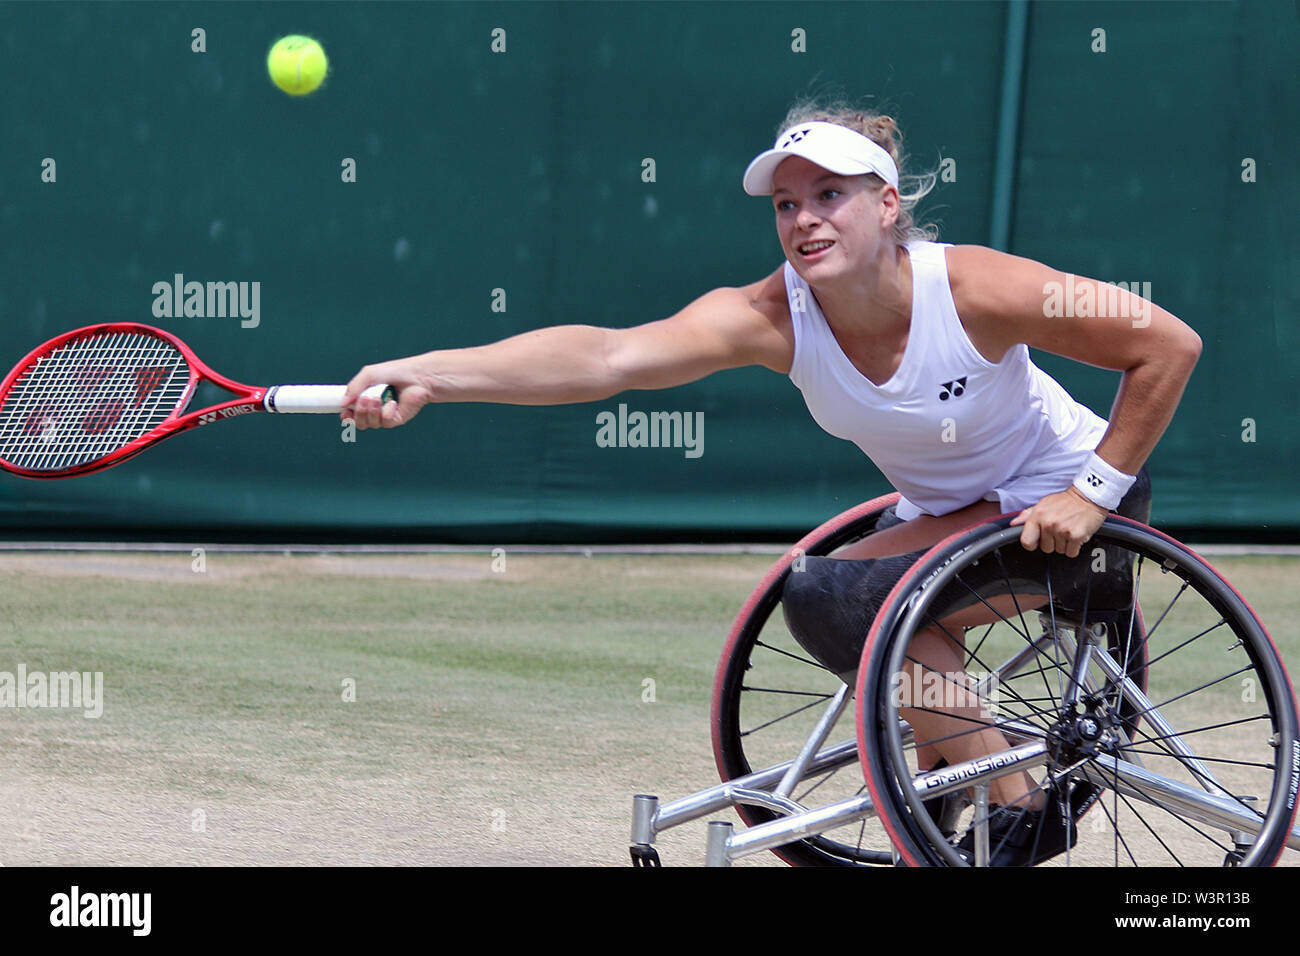 Diede de Groot of the Netherlands in the singles wheelchair tennis  championships at Wimbledon 2019 Stock Photo - Alamy